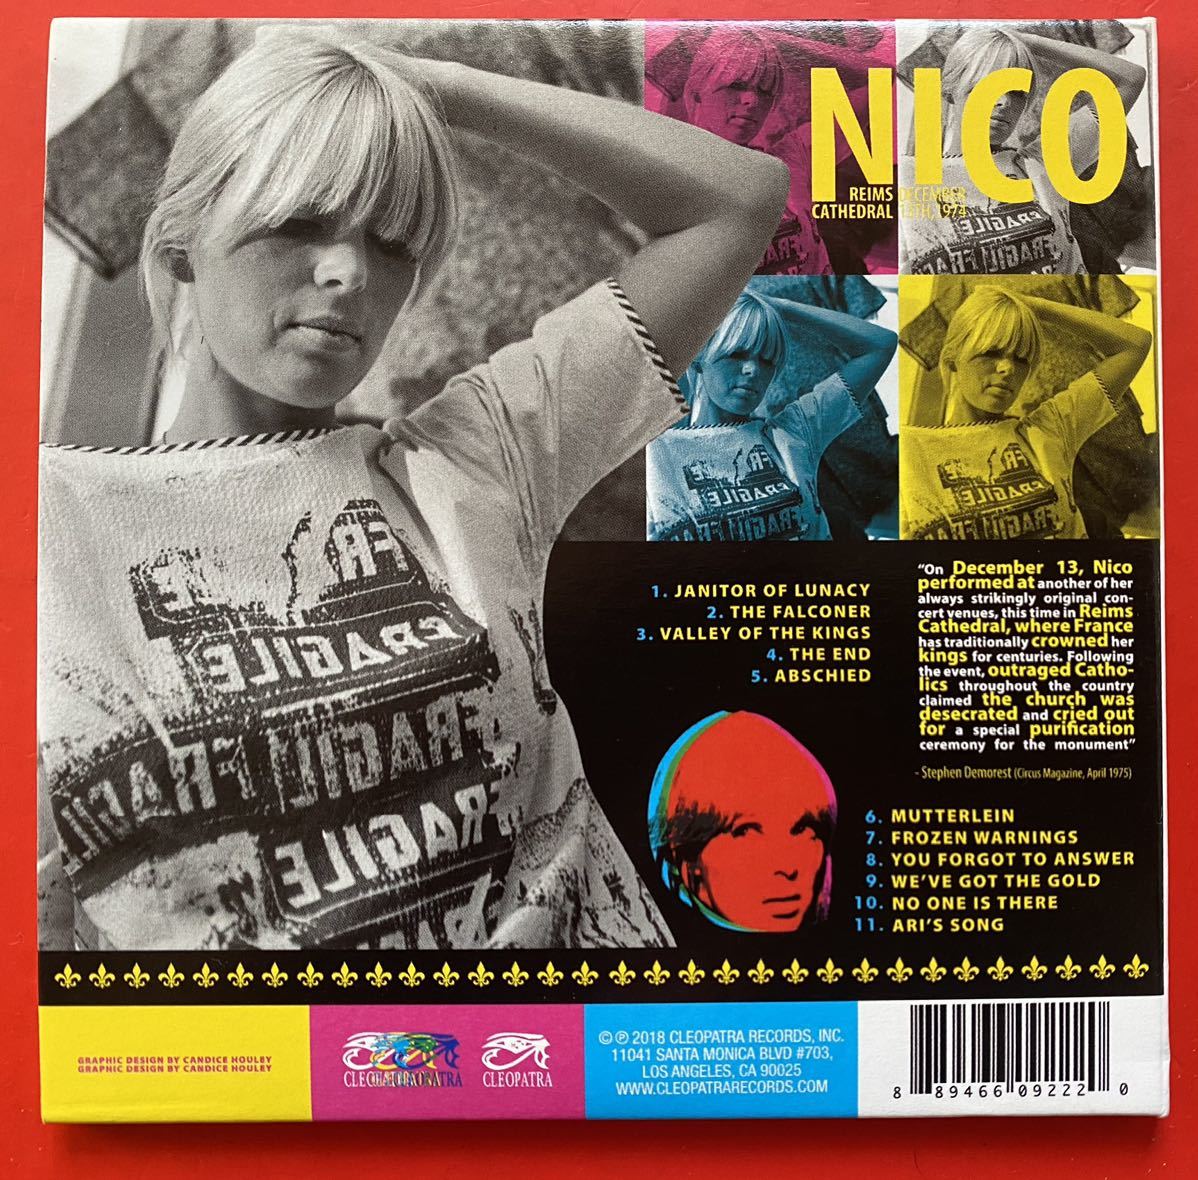 【CD】NICO「REIMS CATHEDRAL DECEMBER 13 TH,1974」ニコ 輸入盤 [09061320]_画像2